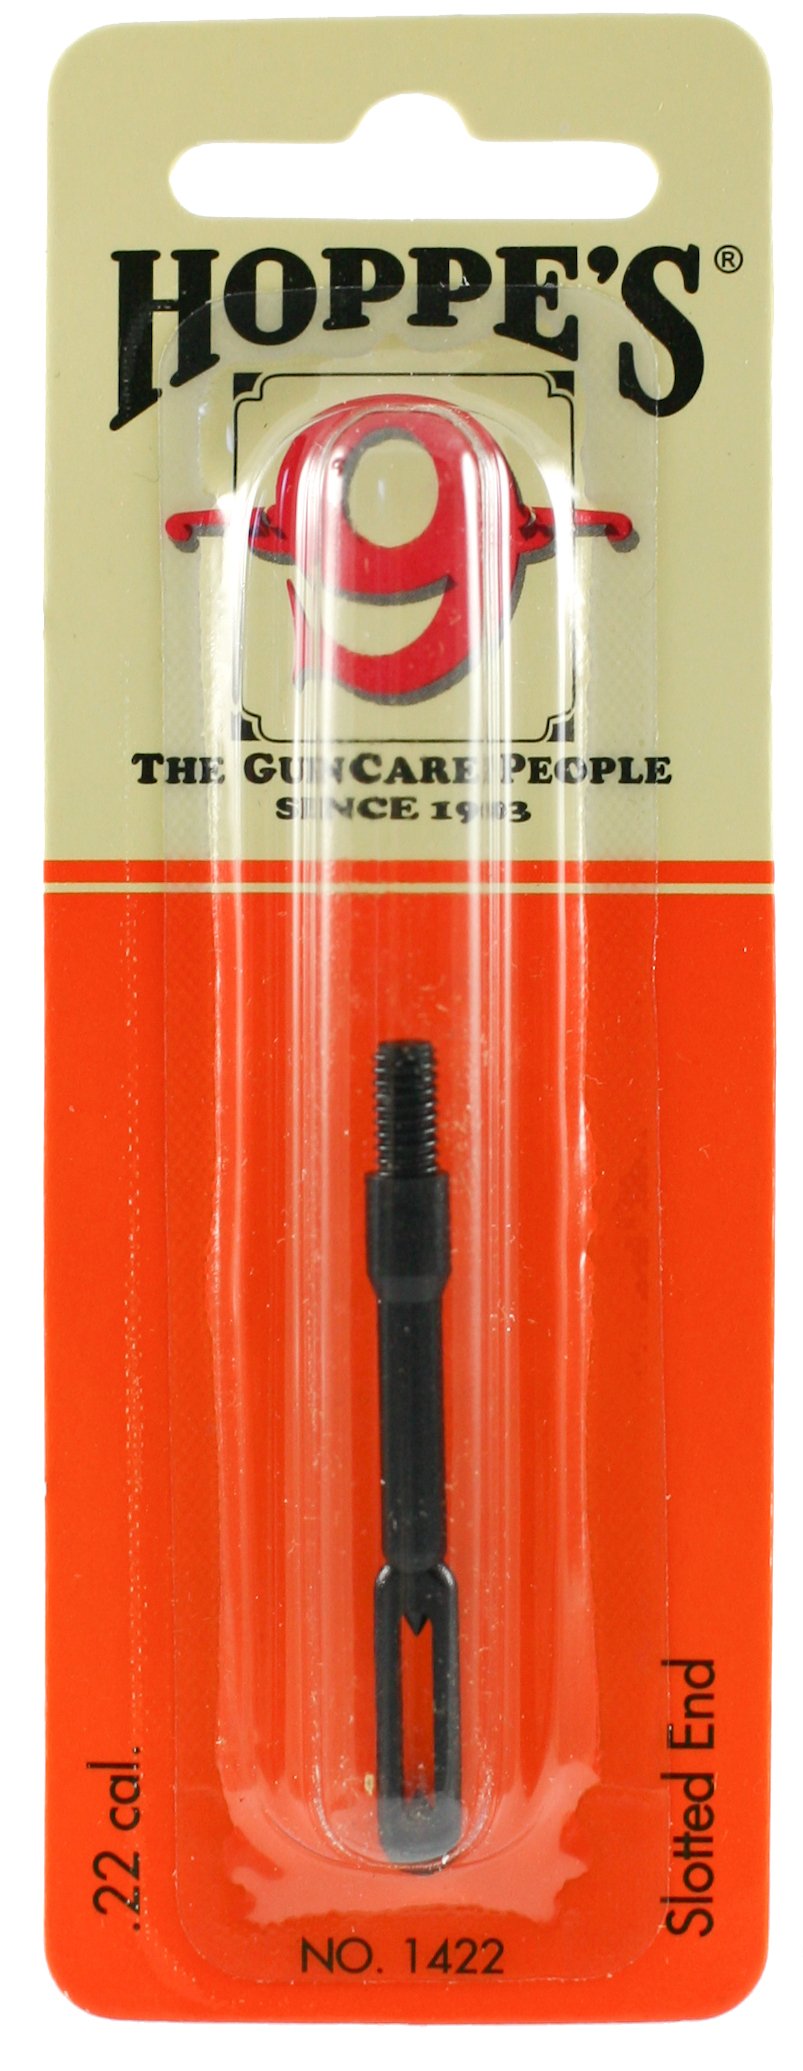 Hoppe's Gun Cleaning Rod Slotted End, .22 Caliber Card